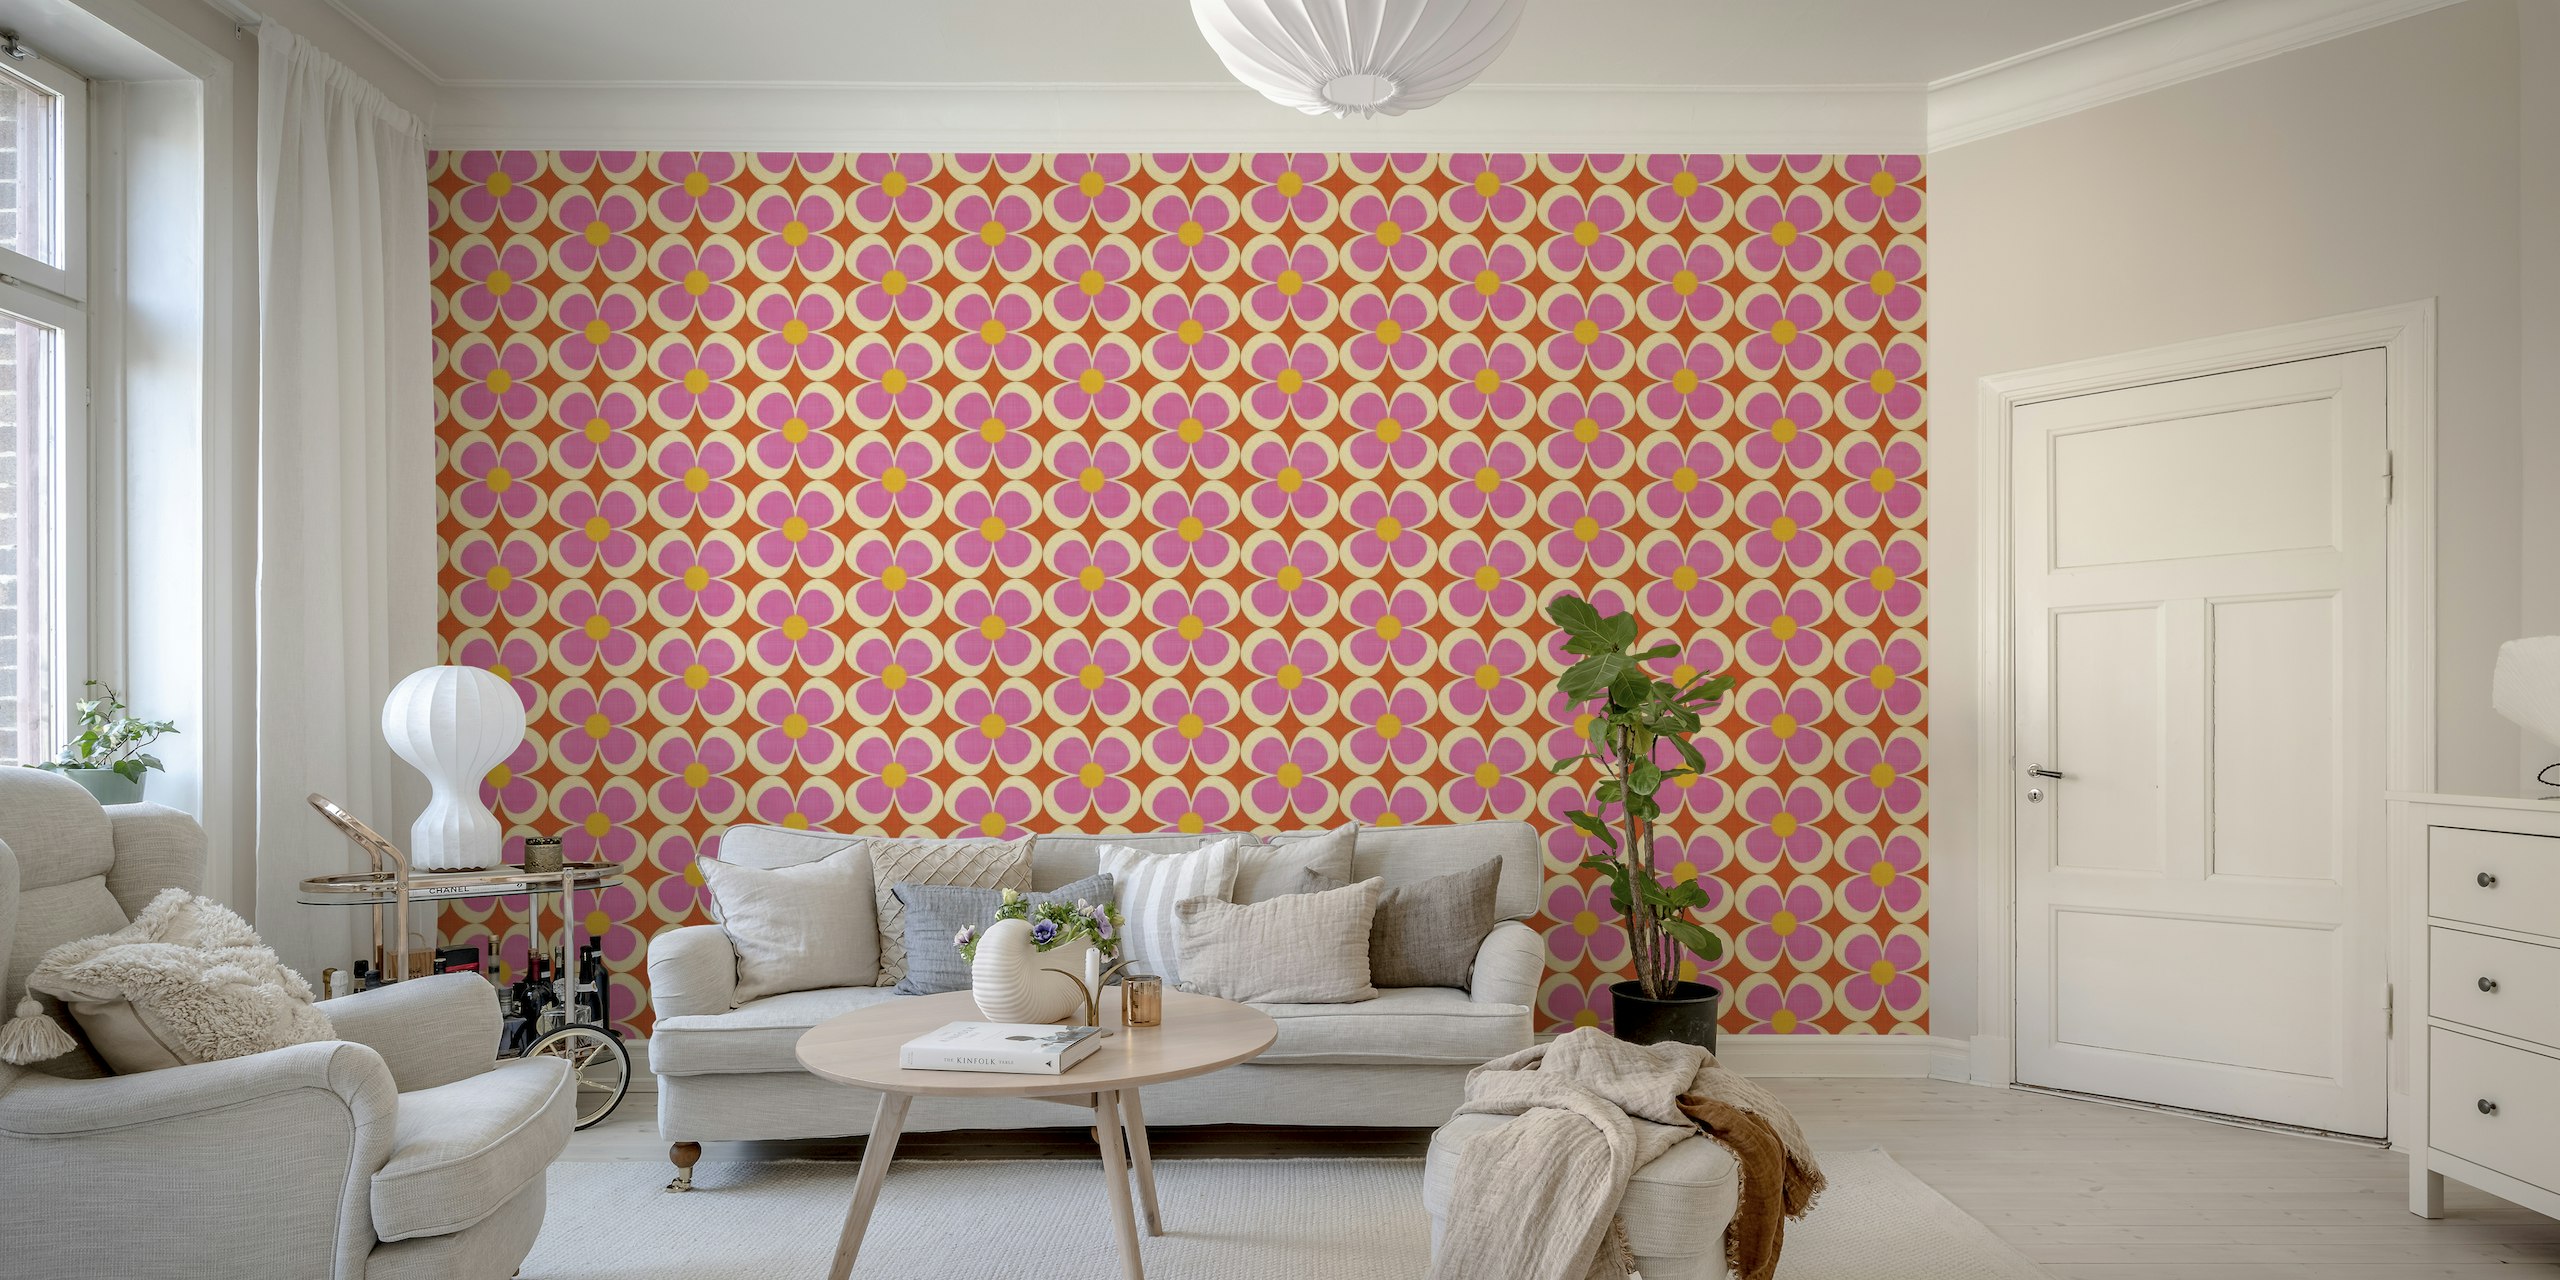 Groovy Geometric Floral Pink Orange Red Small papel de parede